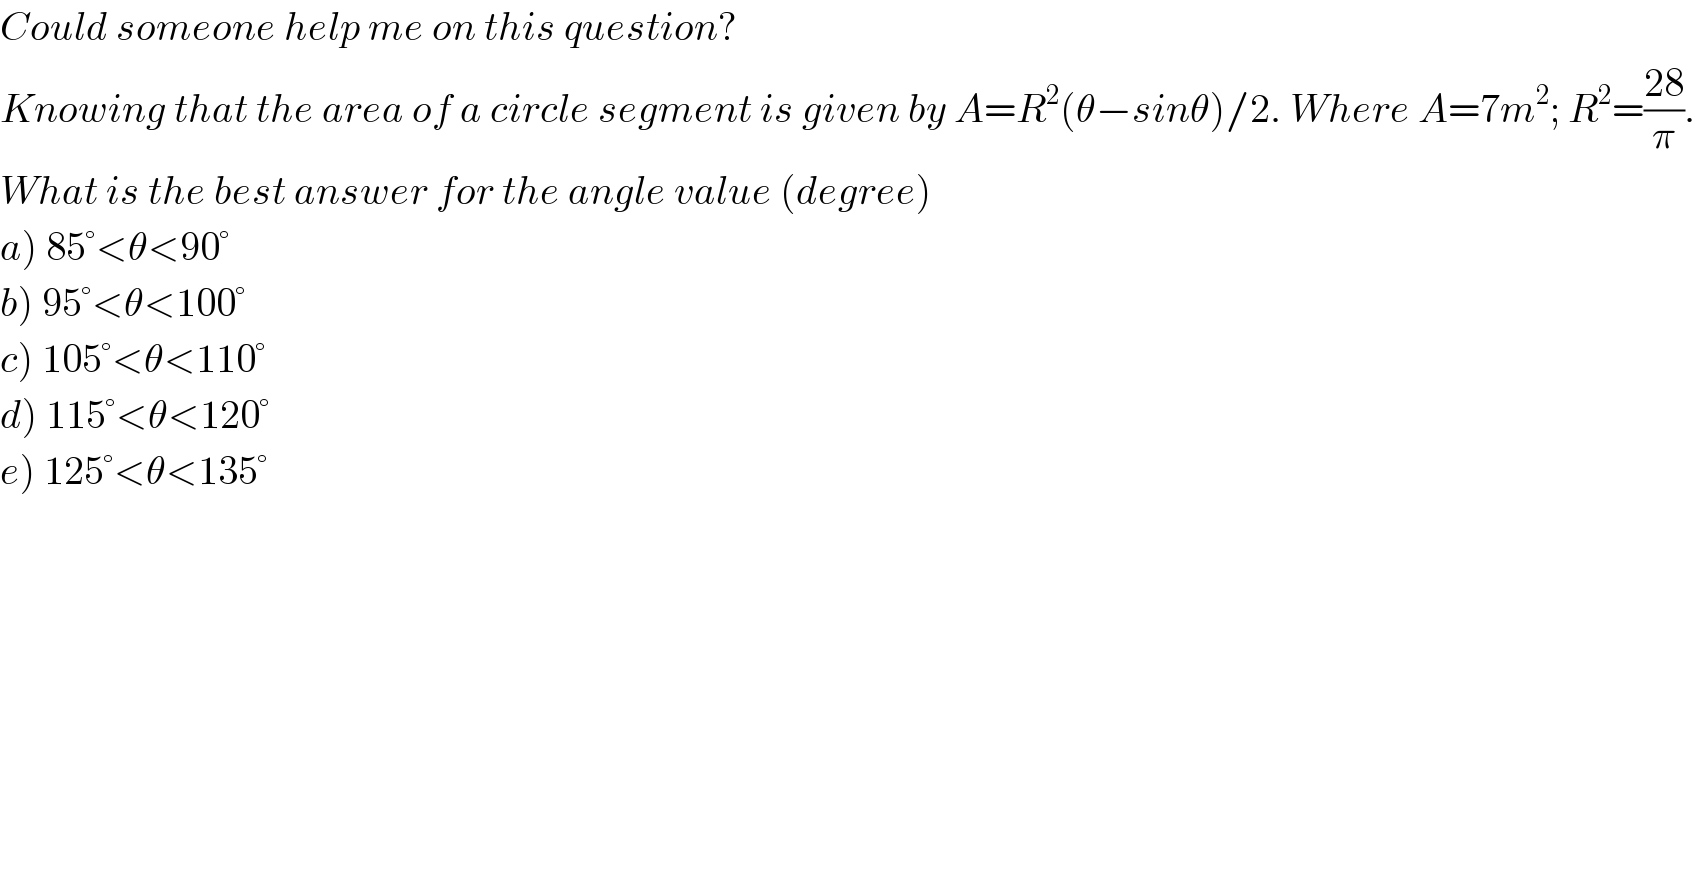 Could someone help me on this question?  Knowing that the area of a circle segment is given by A=R^2 (θ−sinθ)/2. Where A=7m^2 ; R^2 =((28)/π).  What is the best answer for the angle value (degree)  a) 85°<θ<90°  b) 95°<θ<100°  c) 105°<θ<110°  d) 115°<θ<120°  e) 125°<θ<135°  